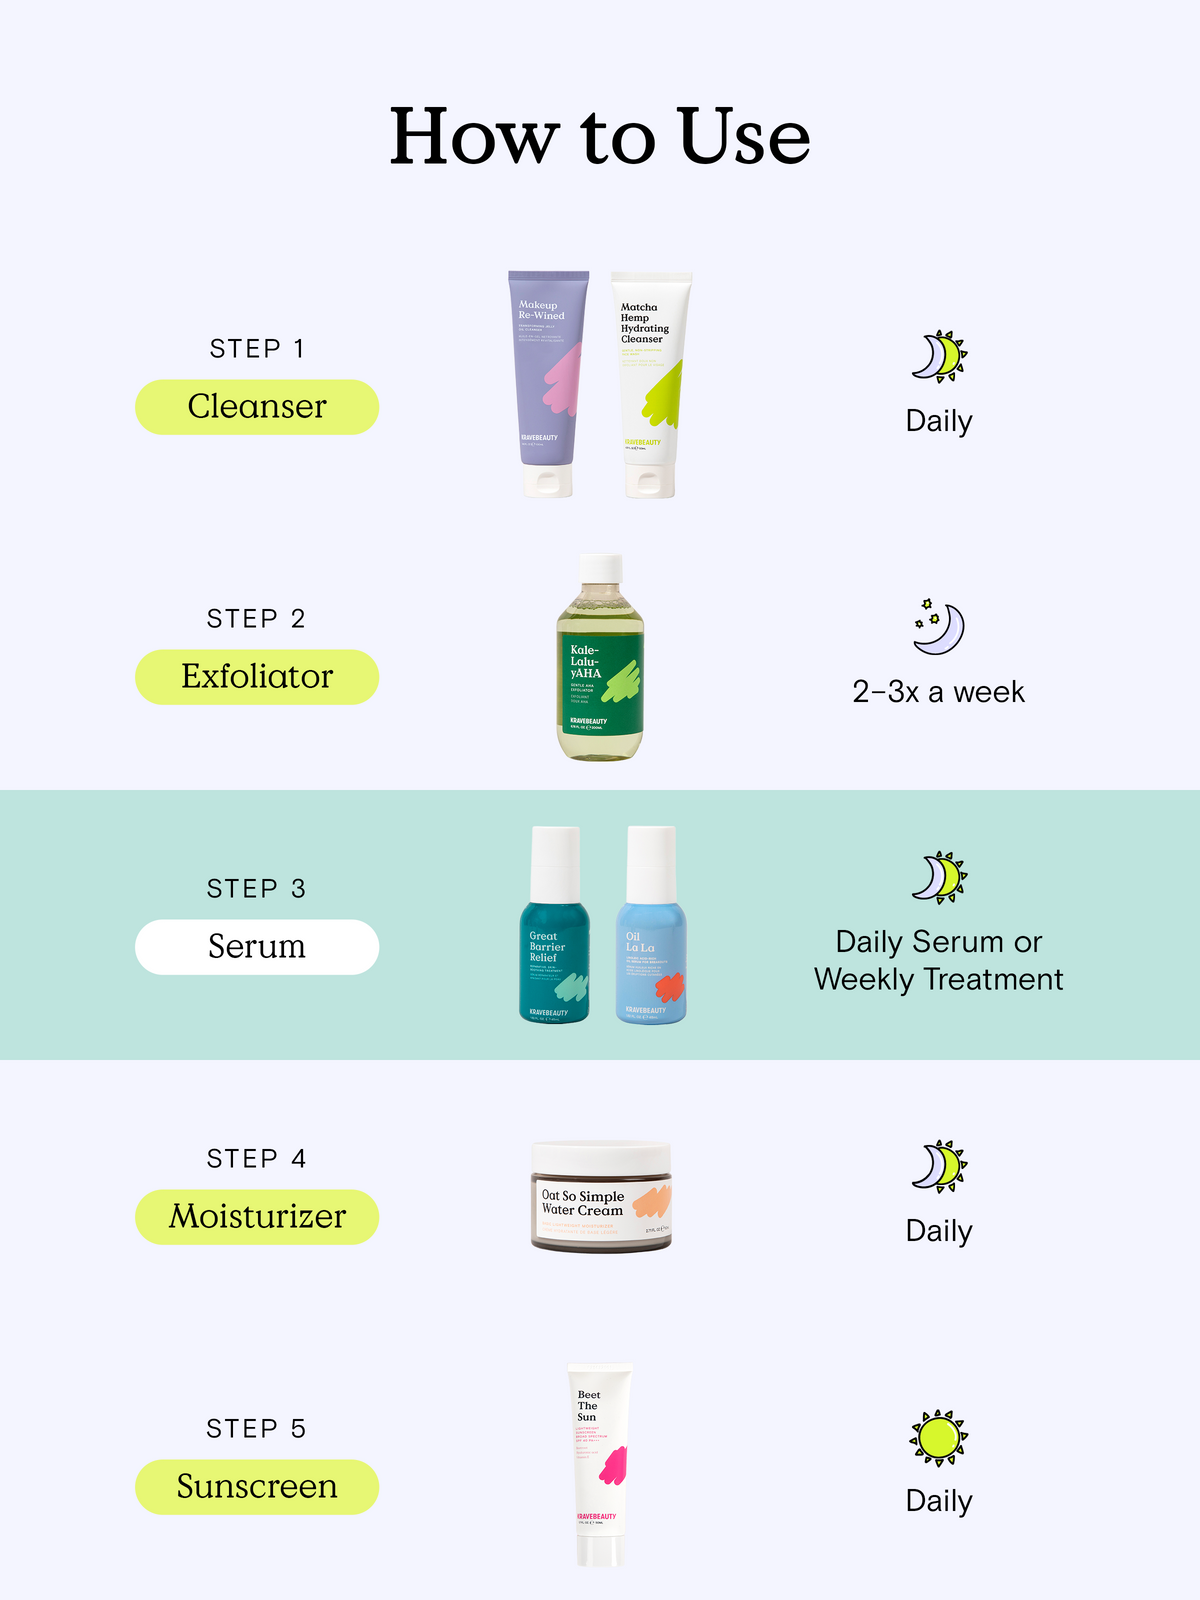 How to use the Picture Pore-Fect Duo in your skincare routine.  Step 1 use Makeup Re-wined Oil Cleanser and Matcha Hemp Hydrating Cleanser as double cleanse daily. Step 2, use Kale-Lalu-yAHA Exfoliator two to three times a week. Step 3 use Great Barrier Relief and Oil La La as a daily or weekly treatment depending on your skin's needs.  Step 4, use Oat So Simple Water Cream as a daily moisturizer. Step 5, use Beet The Sun SPF 40 PA +++ sunscreen daily.